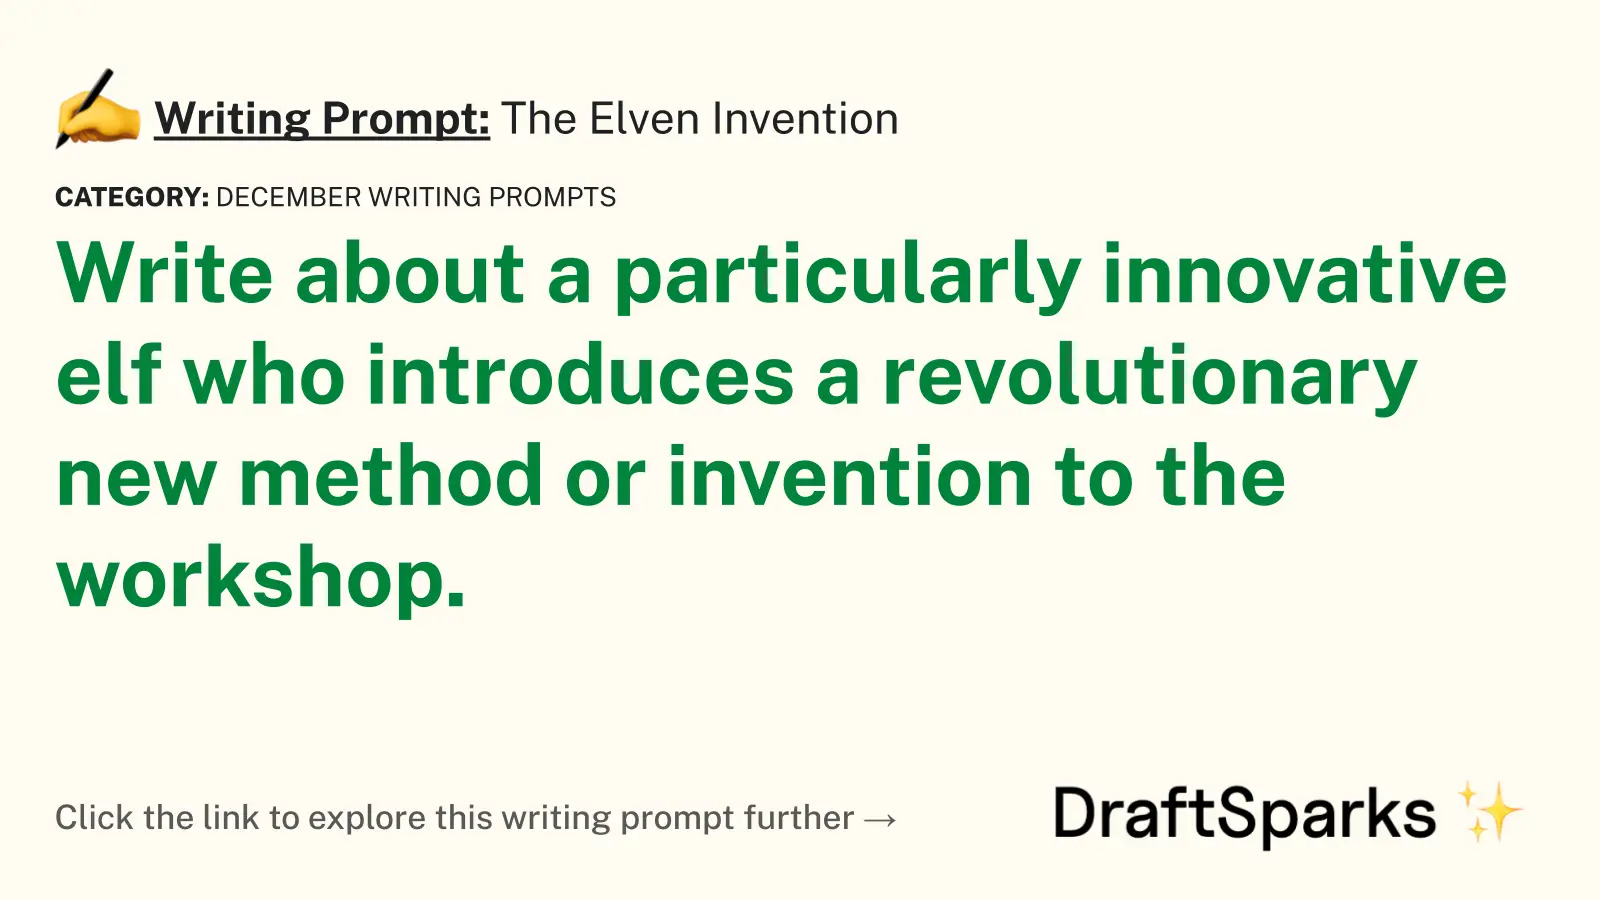 The Elven Invention